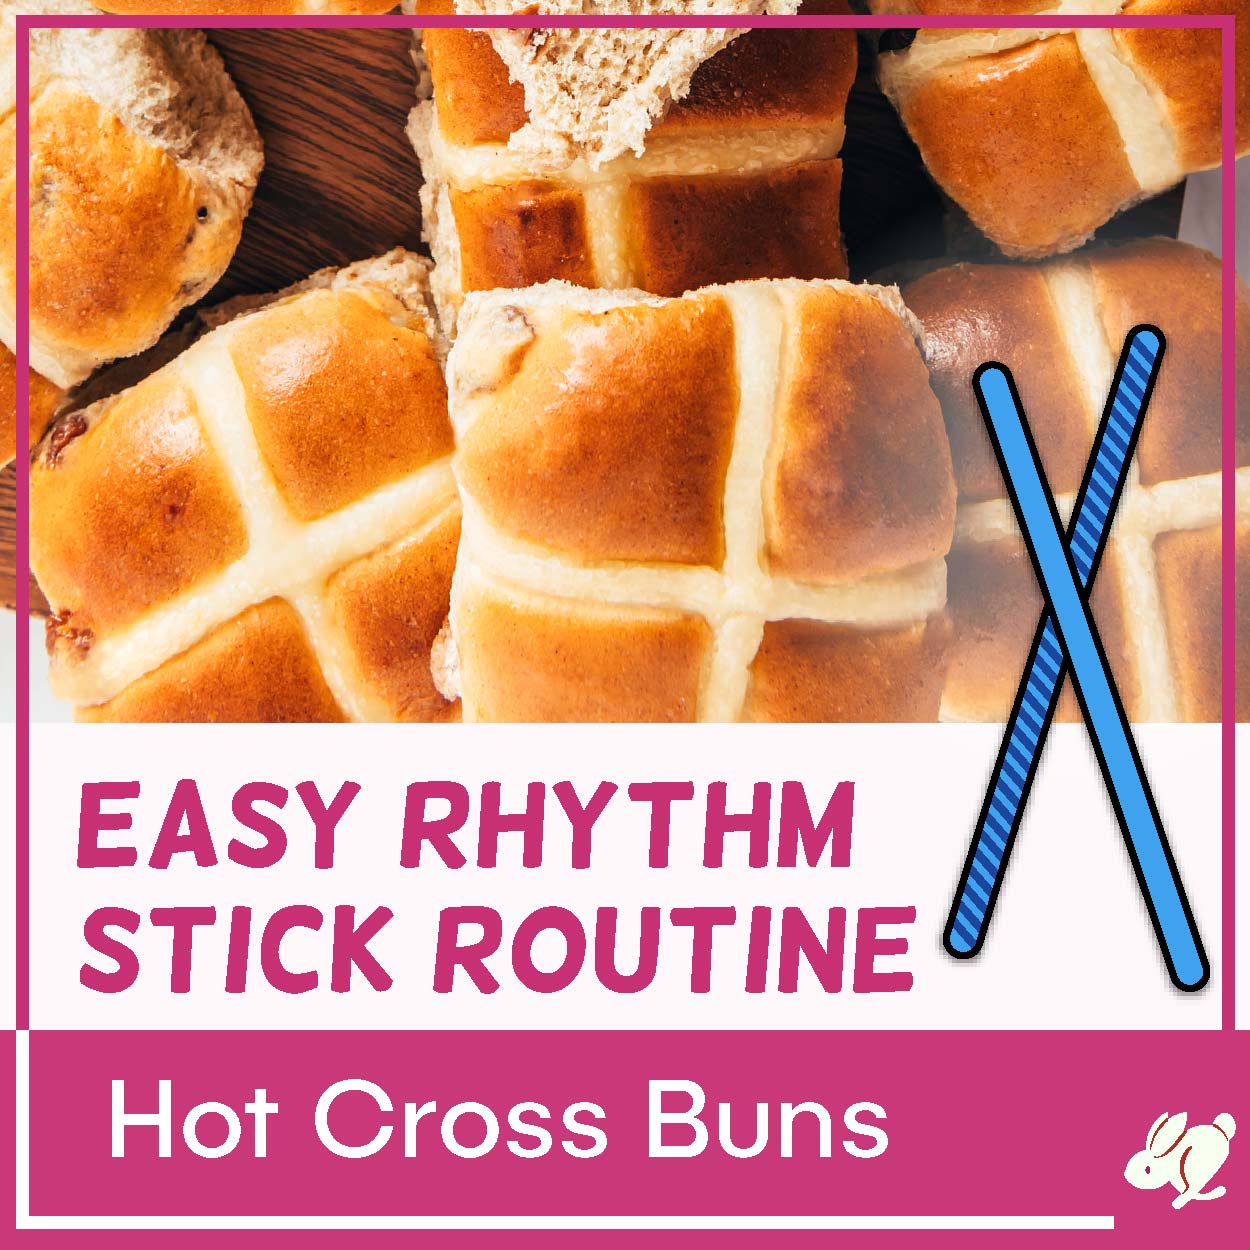 Easy “Hot Cross Buns” Rhythm Stick Routine for Music Class